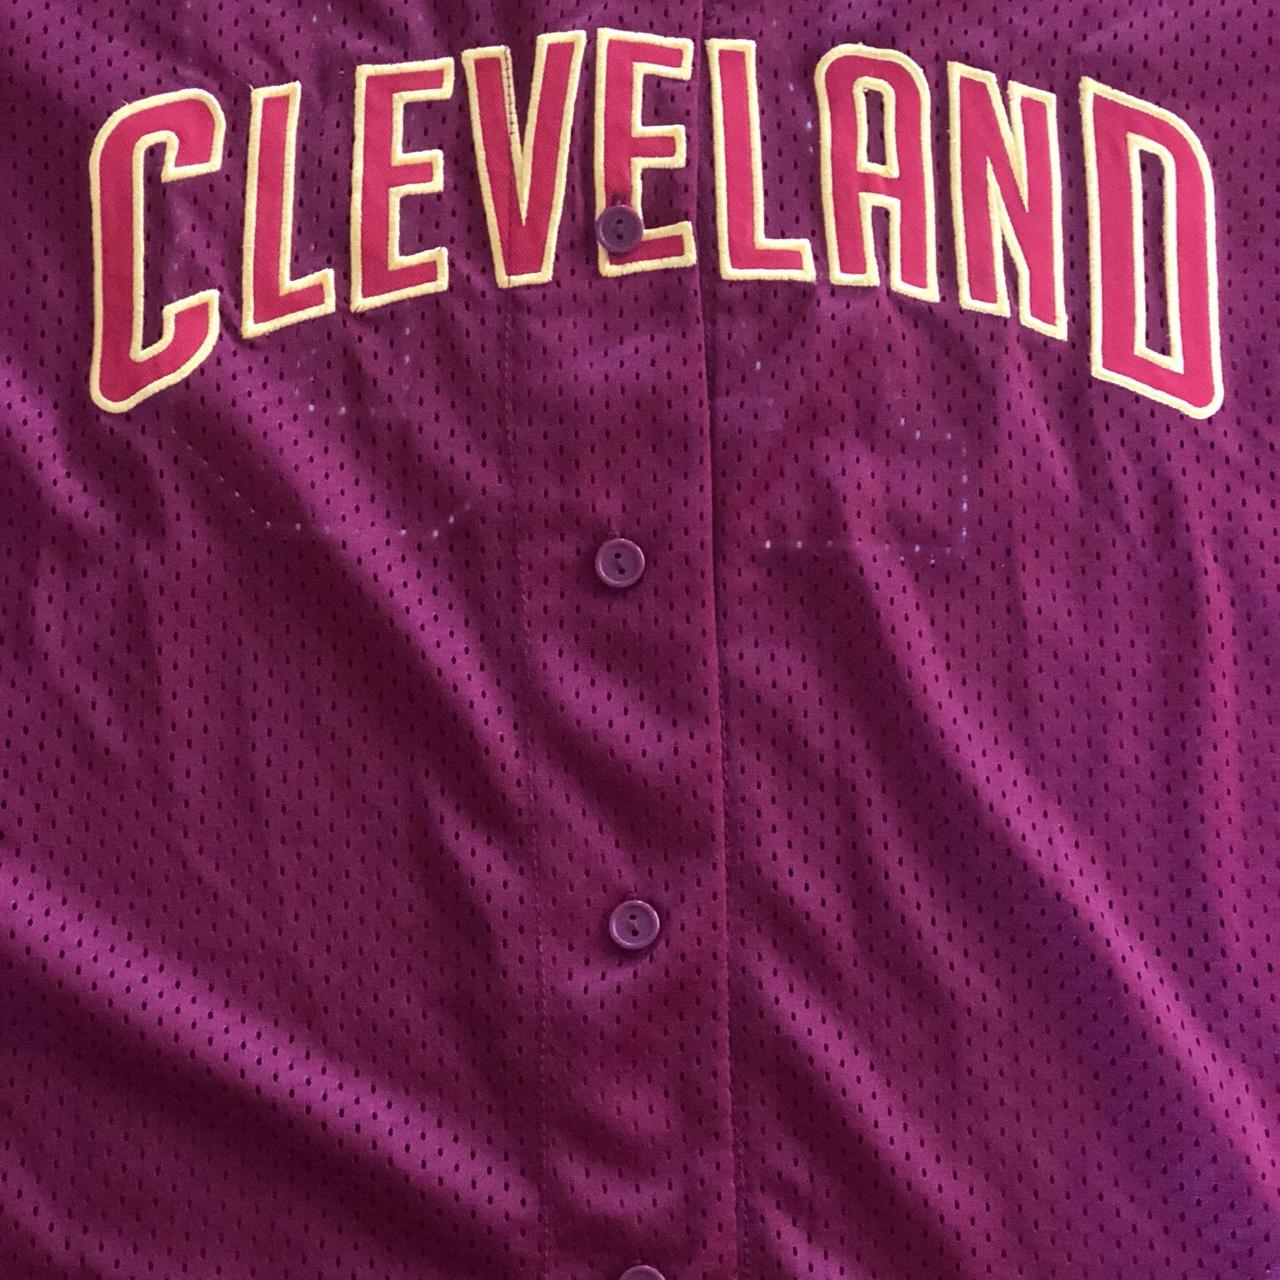 NWT- Cleveland cavaliers NBA store - Depop